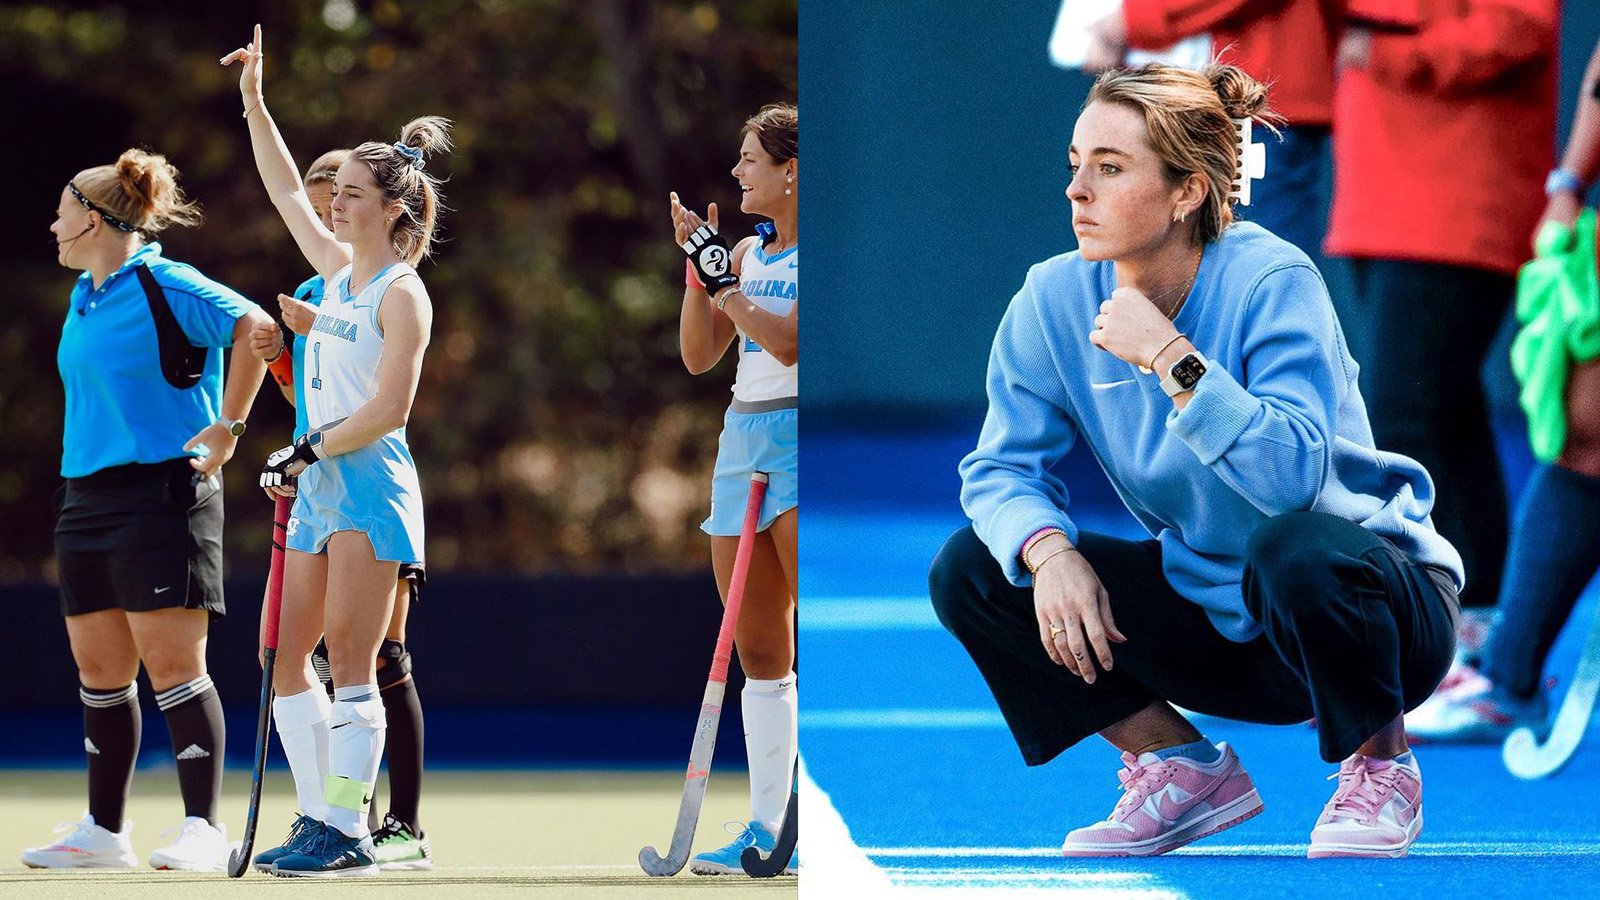 23-Year-Old (!!) Head Coach Leads North Carolina To Her Fifth National Title In Six Years